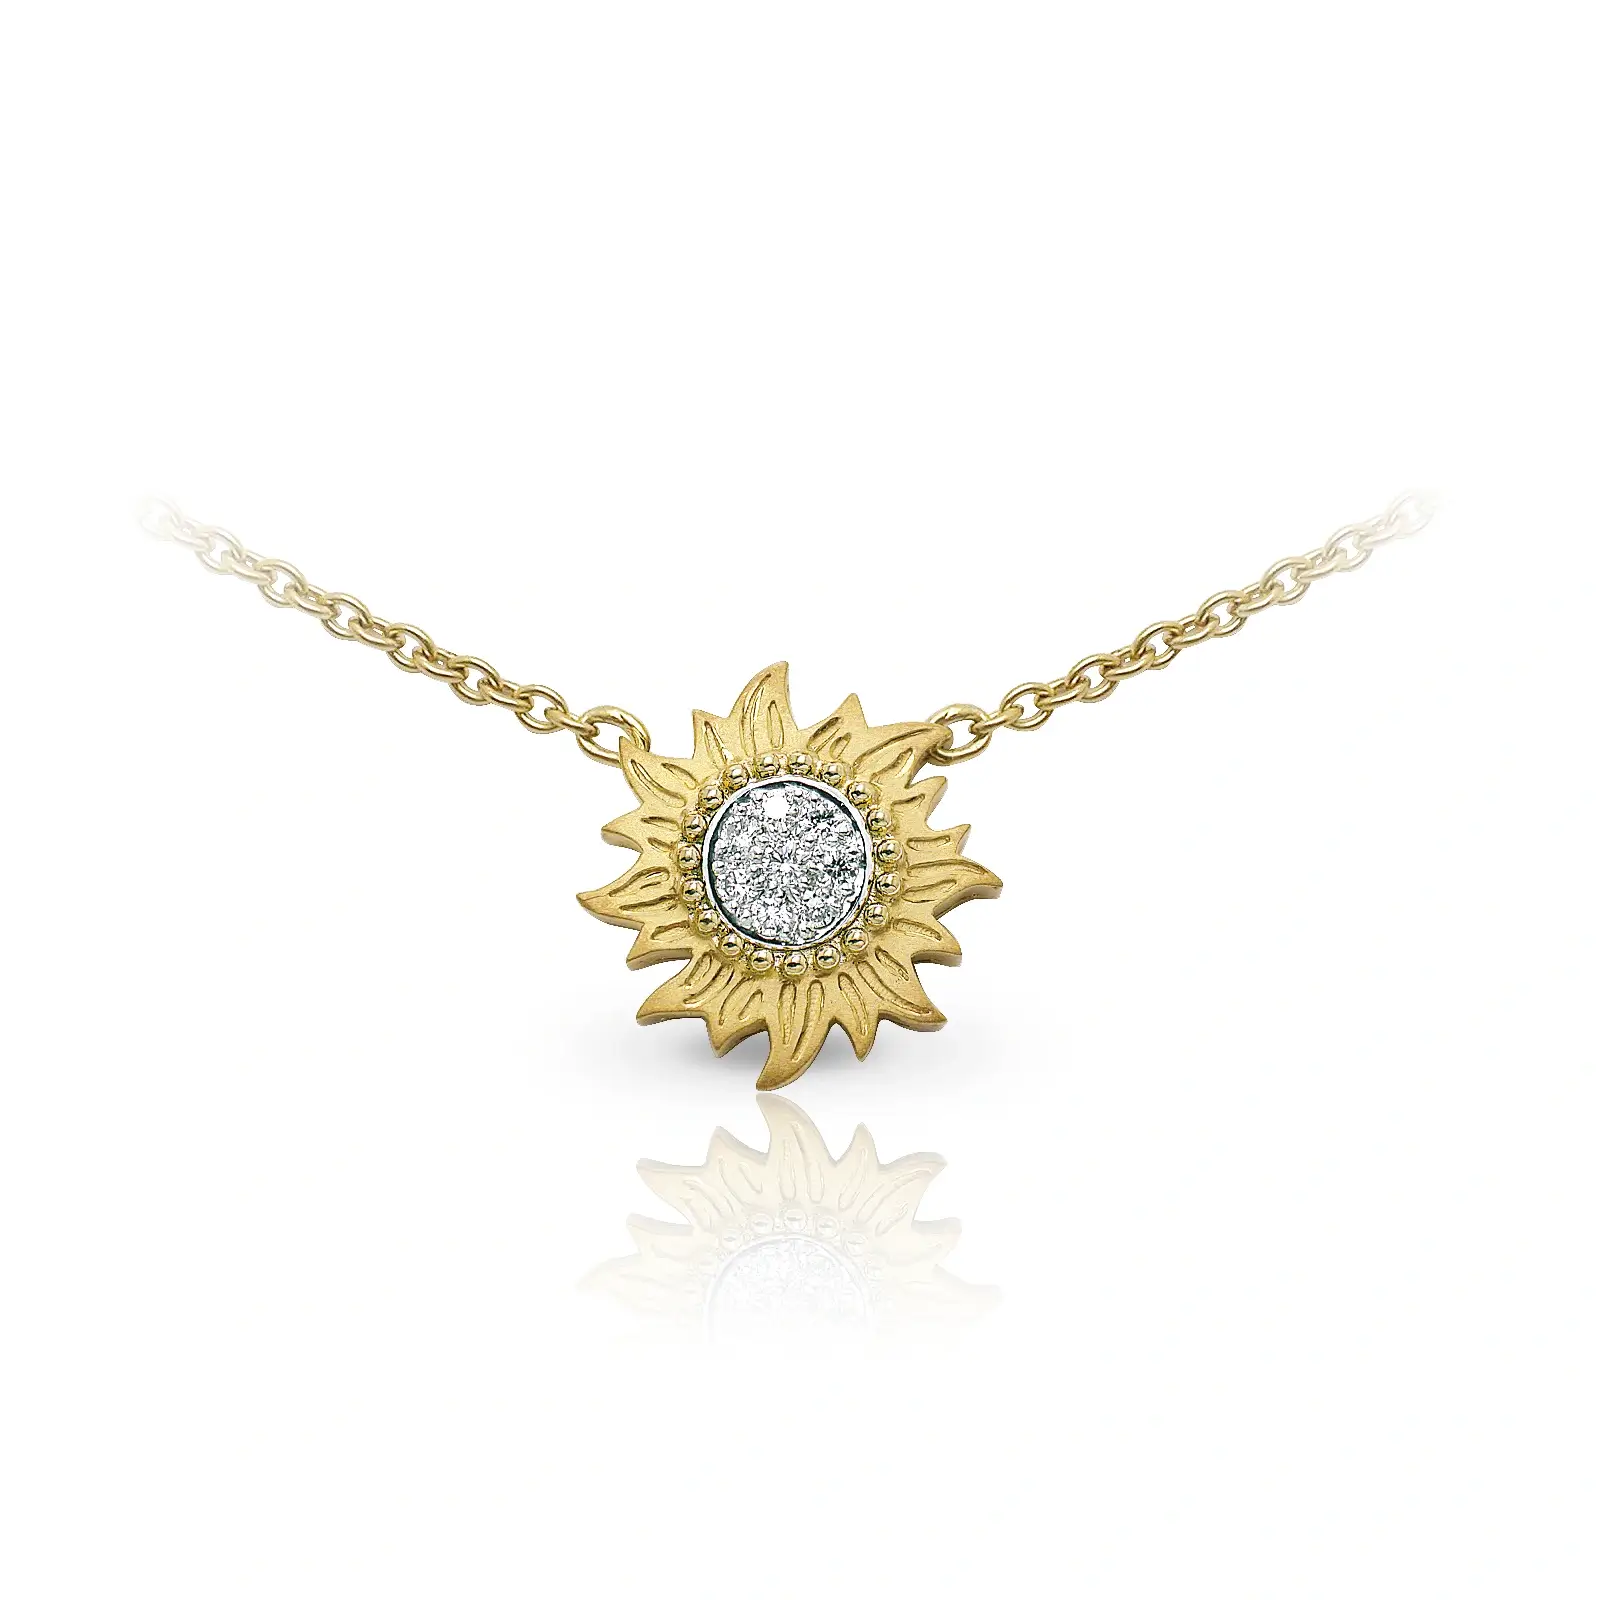 Carrera y Carrera 18K White and Yellow Gold Sol y Sombra Pendant with Diamonds